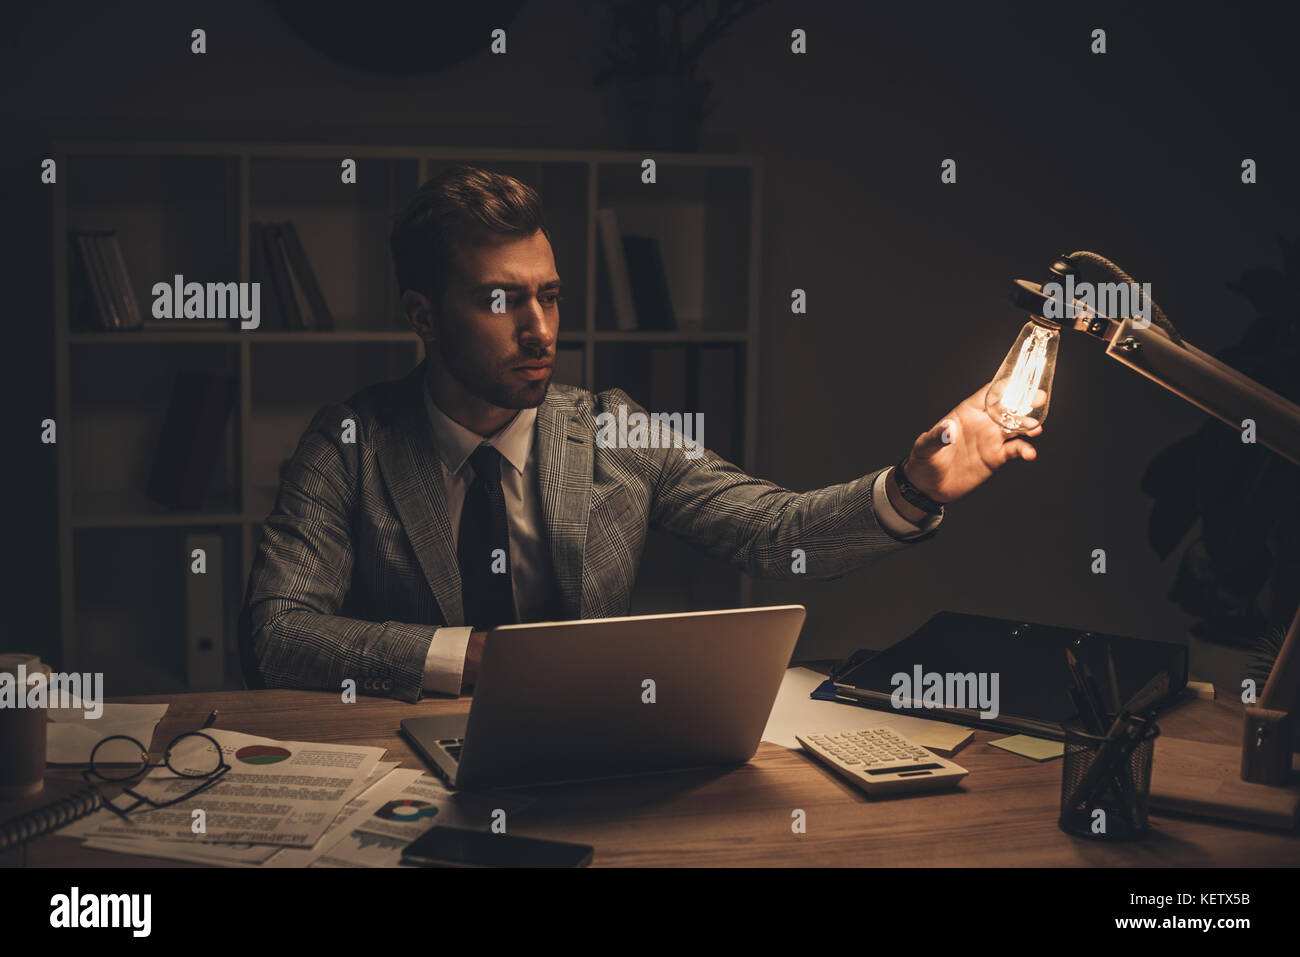 businessman touching table lamp at workplace Stock Photo